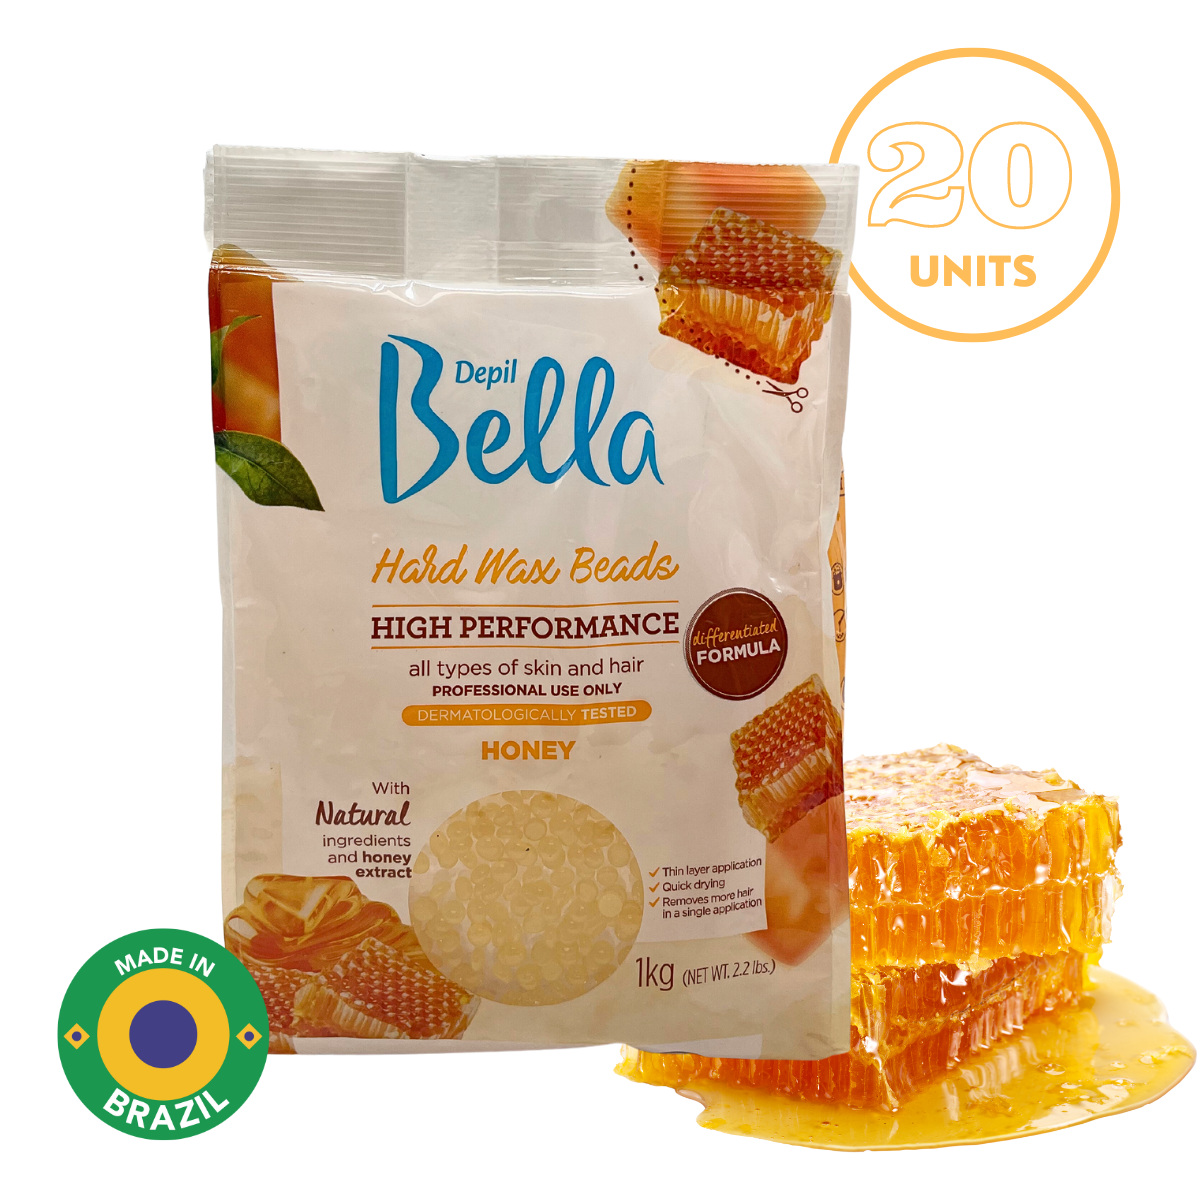 Depil Bella Hard Wax Beads Honey - Professional Hair Removal, 2.2 lbs (20 Units Offer)